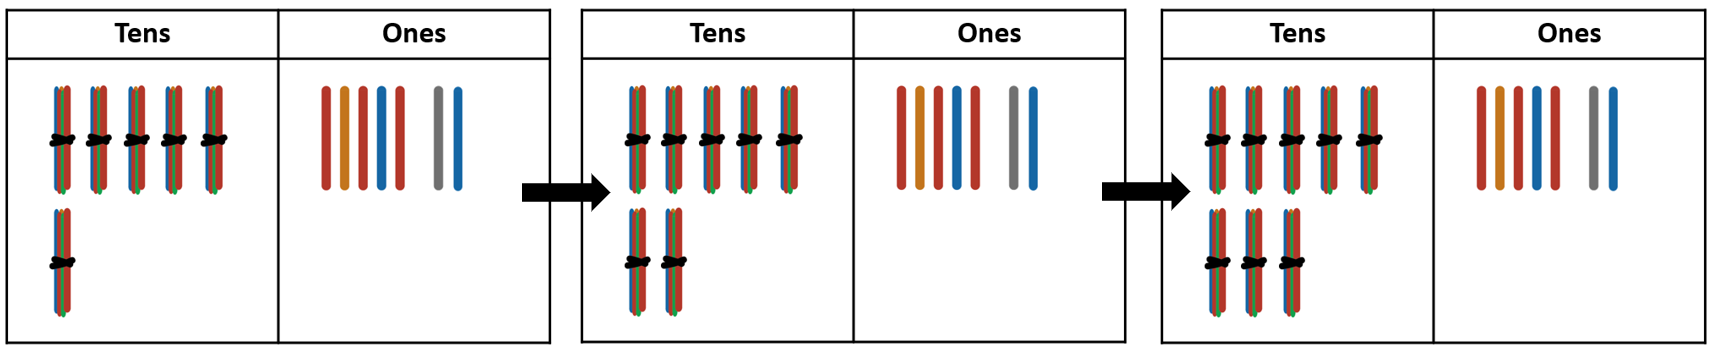 Image of 67, 77, and 87 made using bundled and individual ice block sticks on two-column place value charts. Arrows indicate that one bundle of 10 sticks is added to each number (e.g. 67 + 10 = 77).